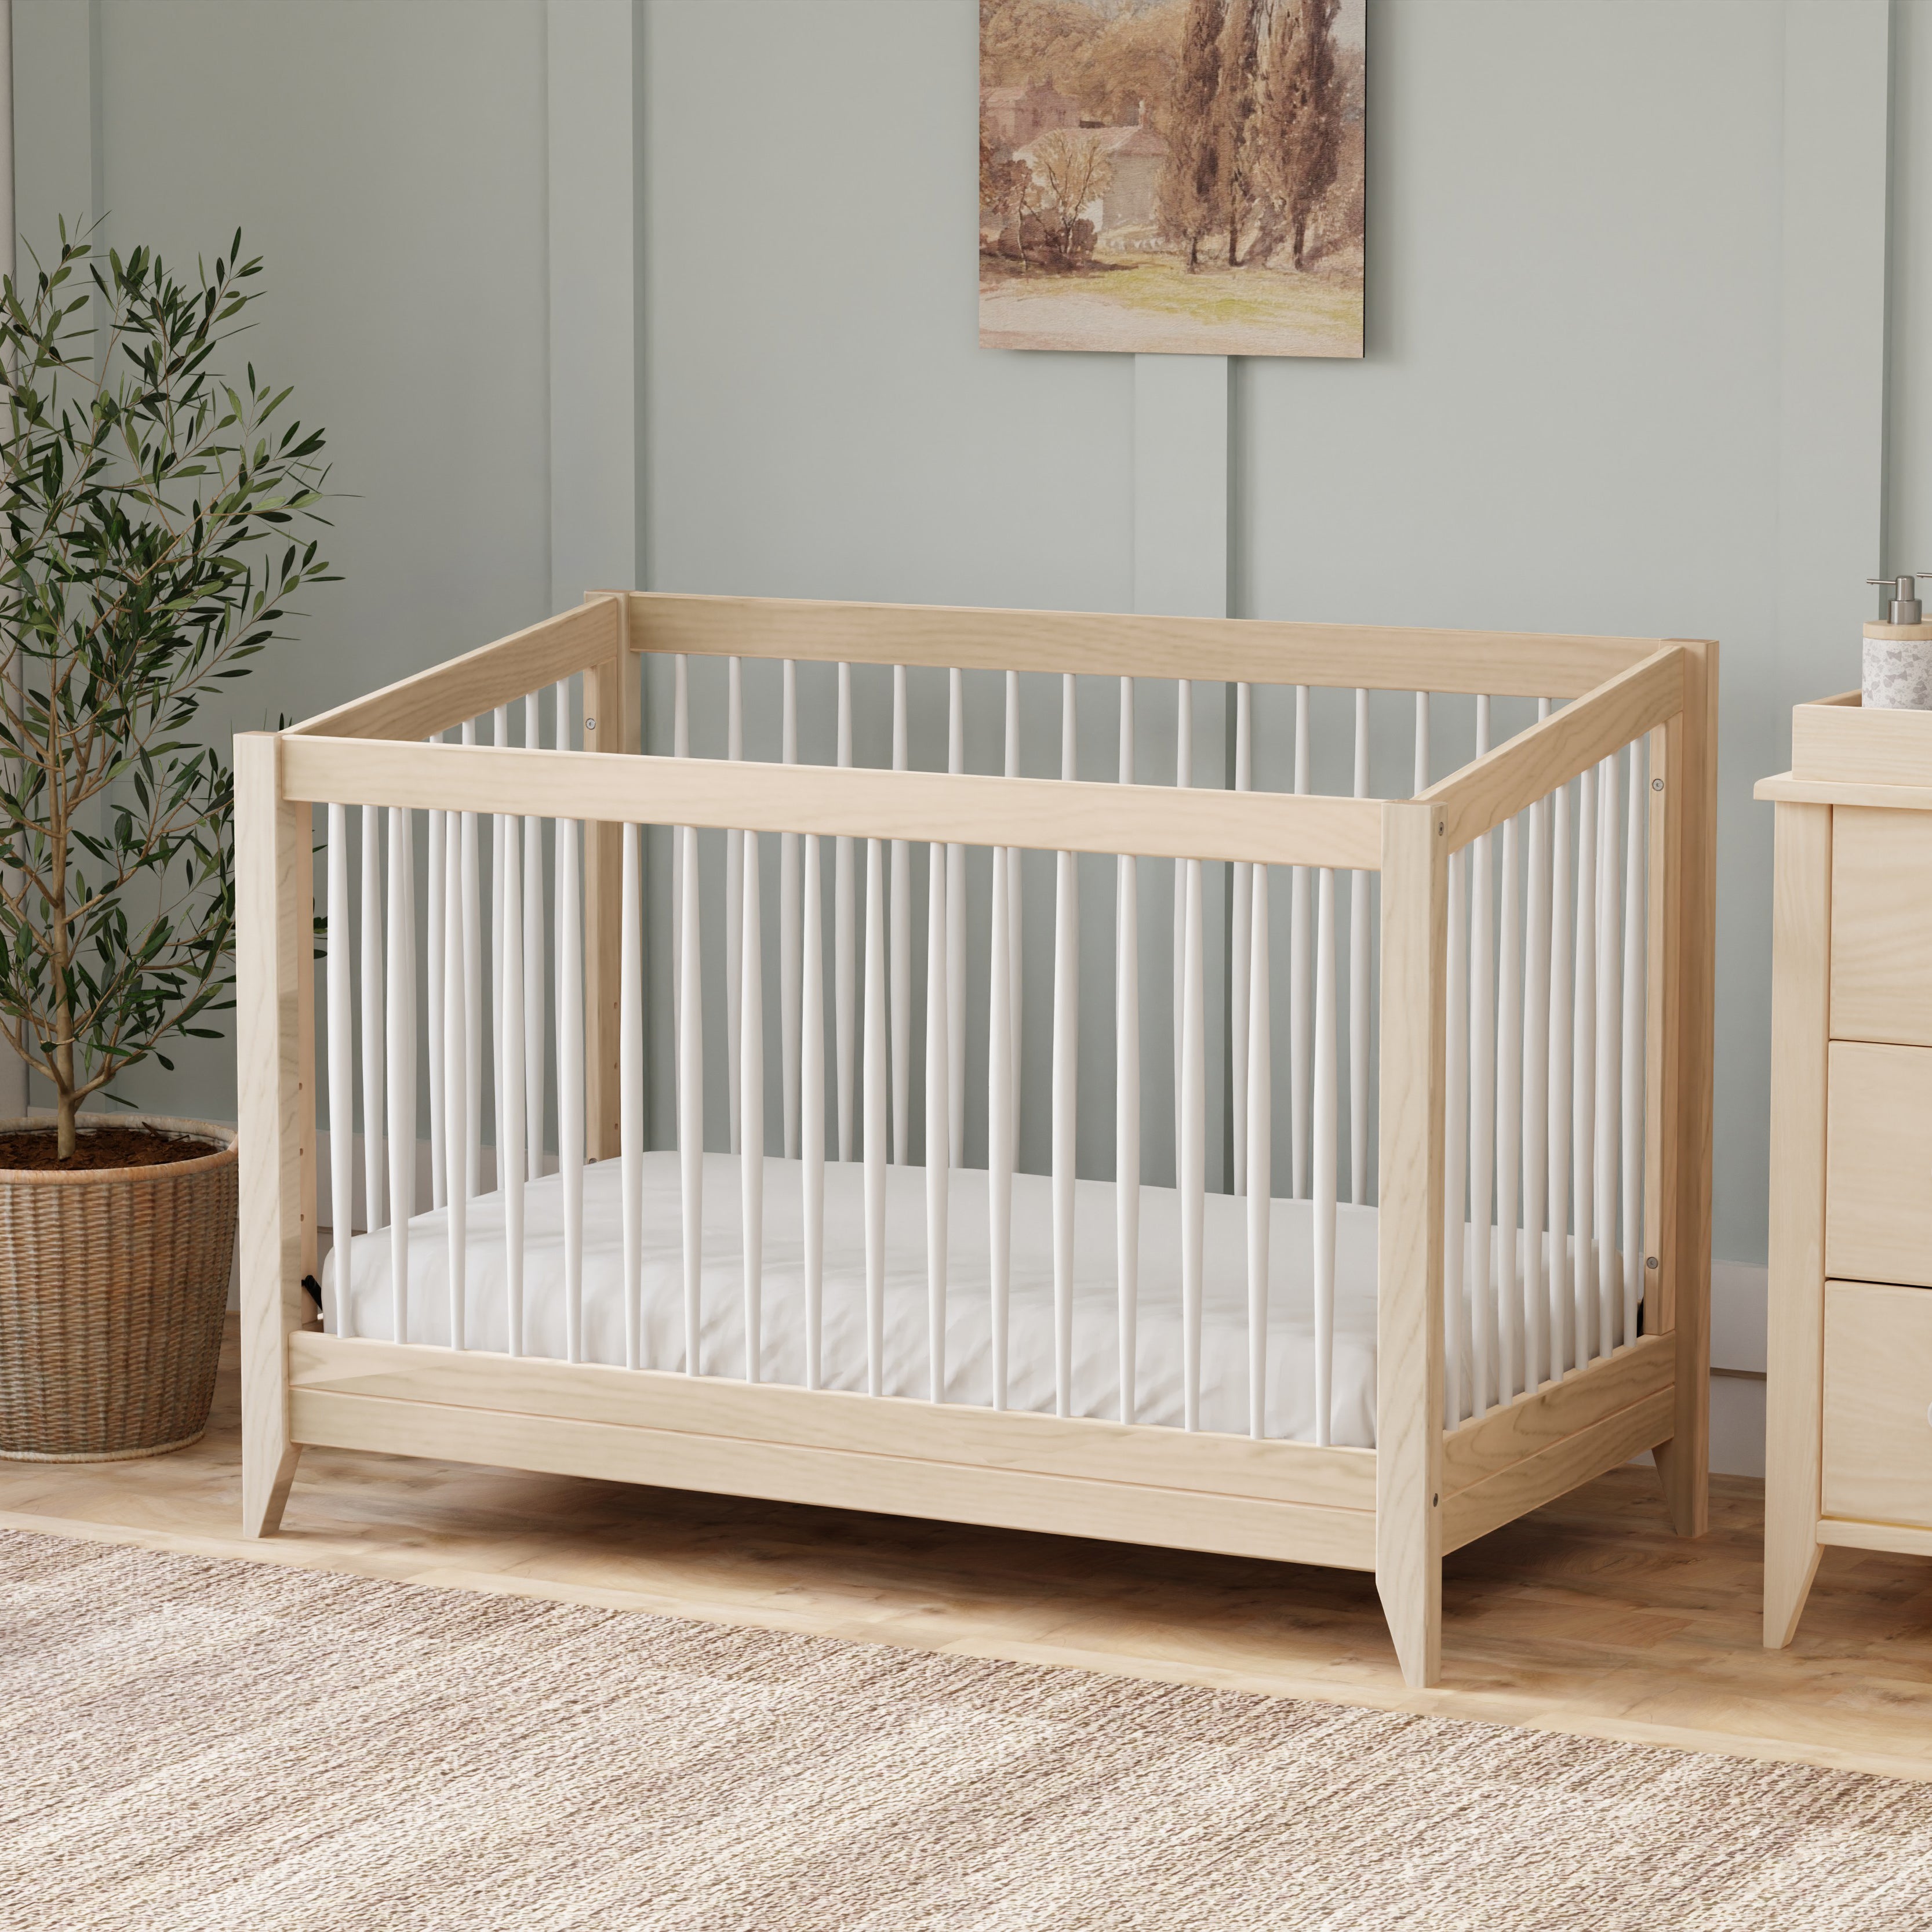 Babyletto Sprout 4-in-1 Convertible Crib with Toddler Bed Conversion Kit